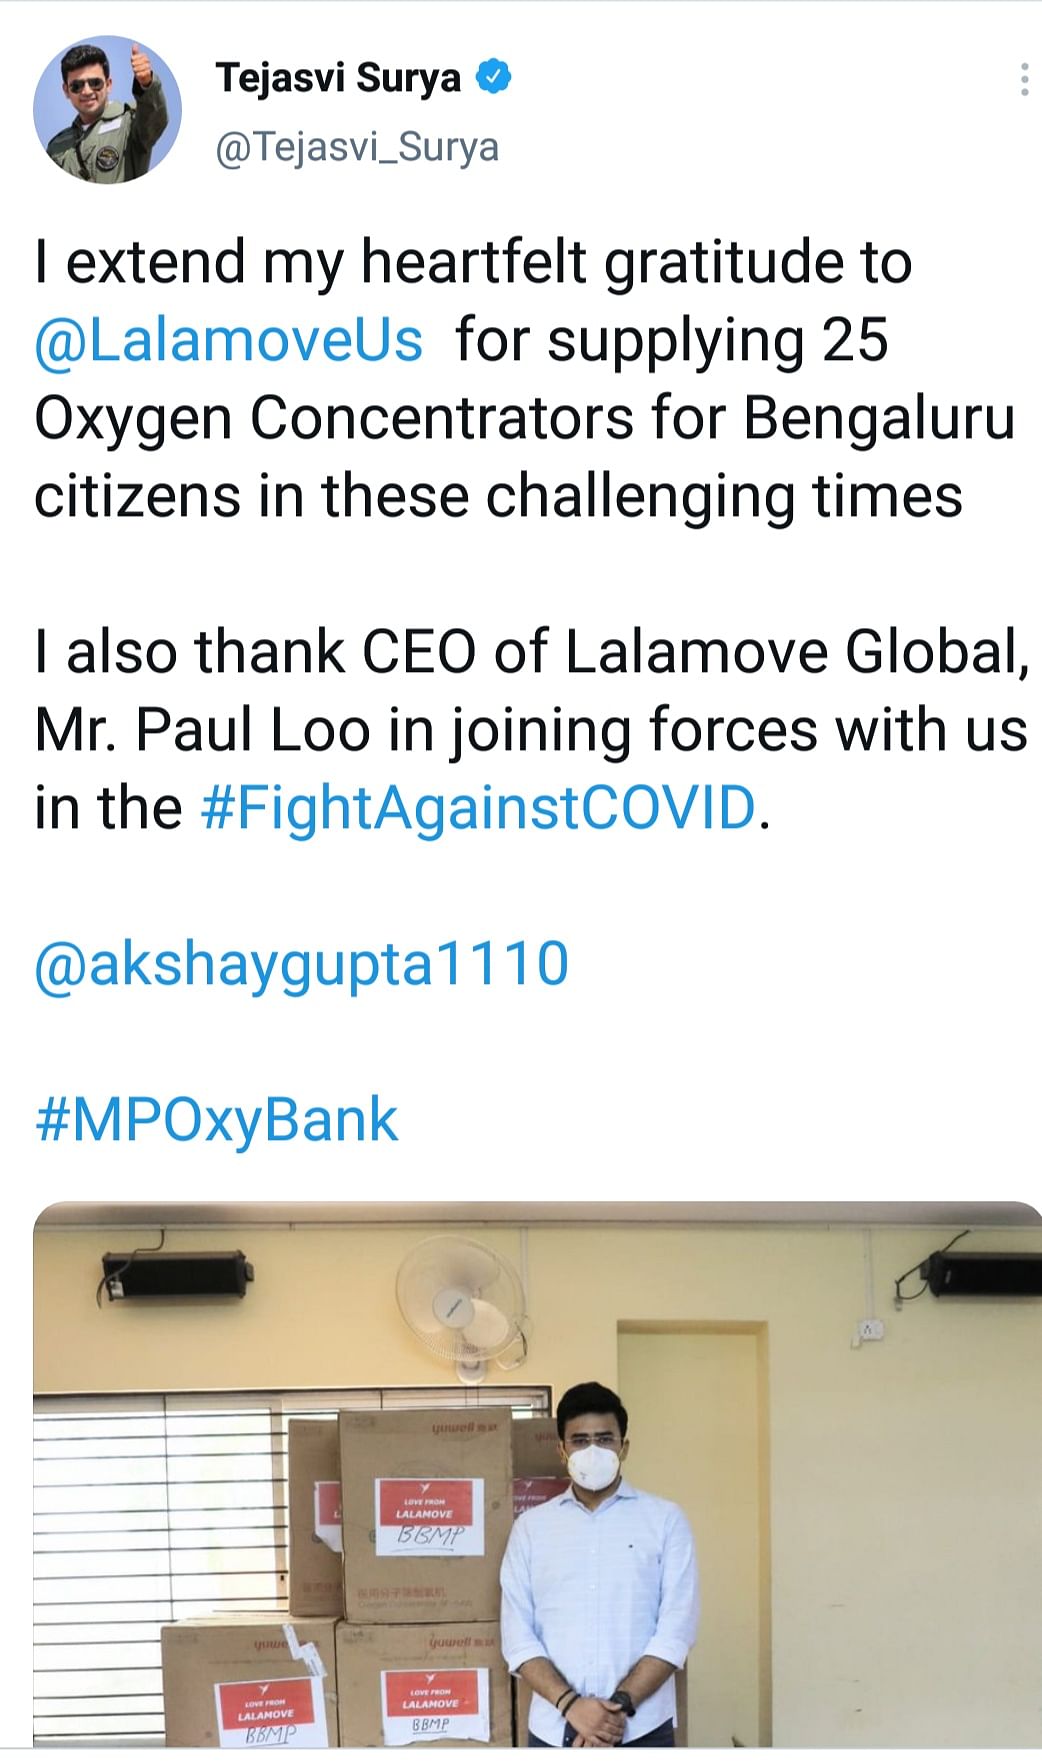 Lalamove-India’s two apps were banned by the Indian government in November 2020. Tejasvi Surya thanked Lalamove-US.